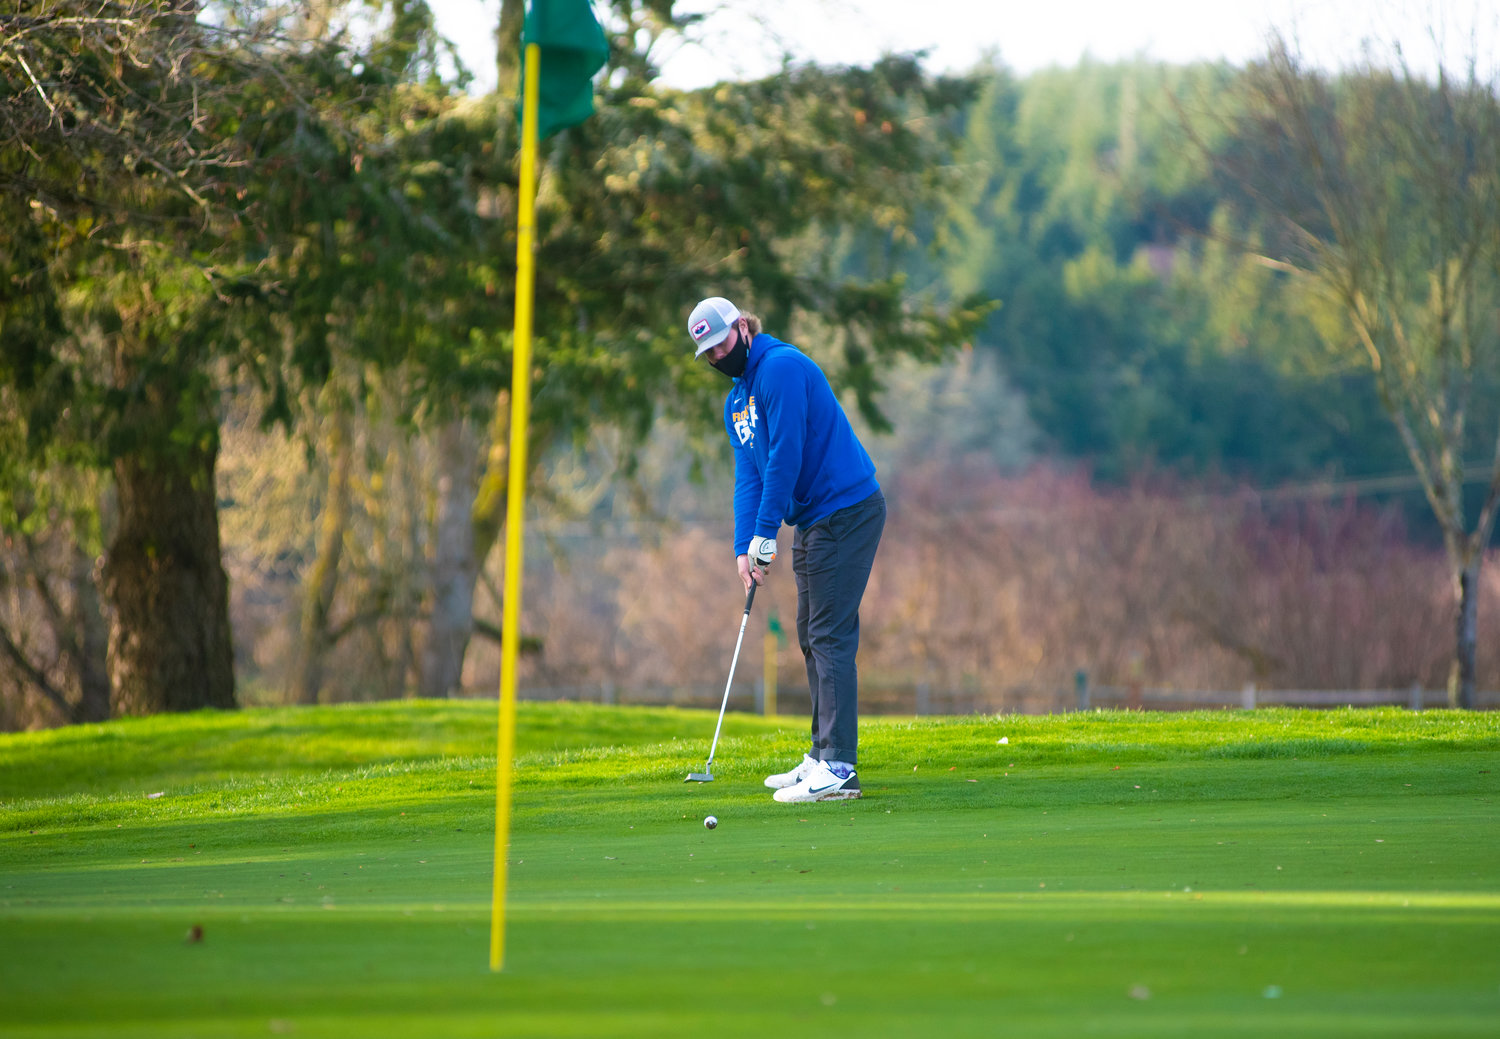 Rochester's Johnny Childers putts during a match against Tumwater at Riverside Golf Course Wednesday.